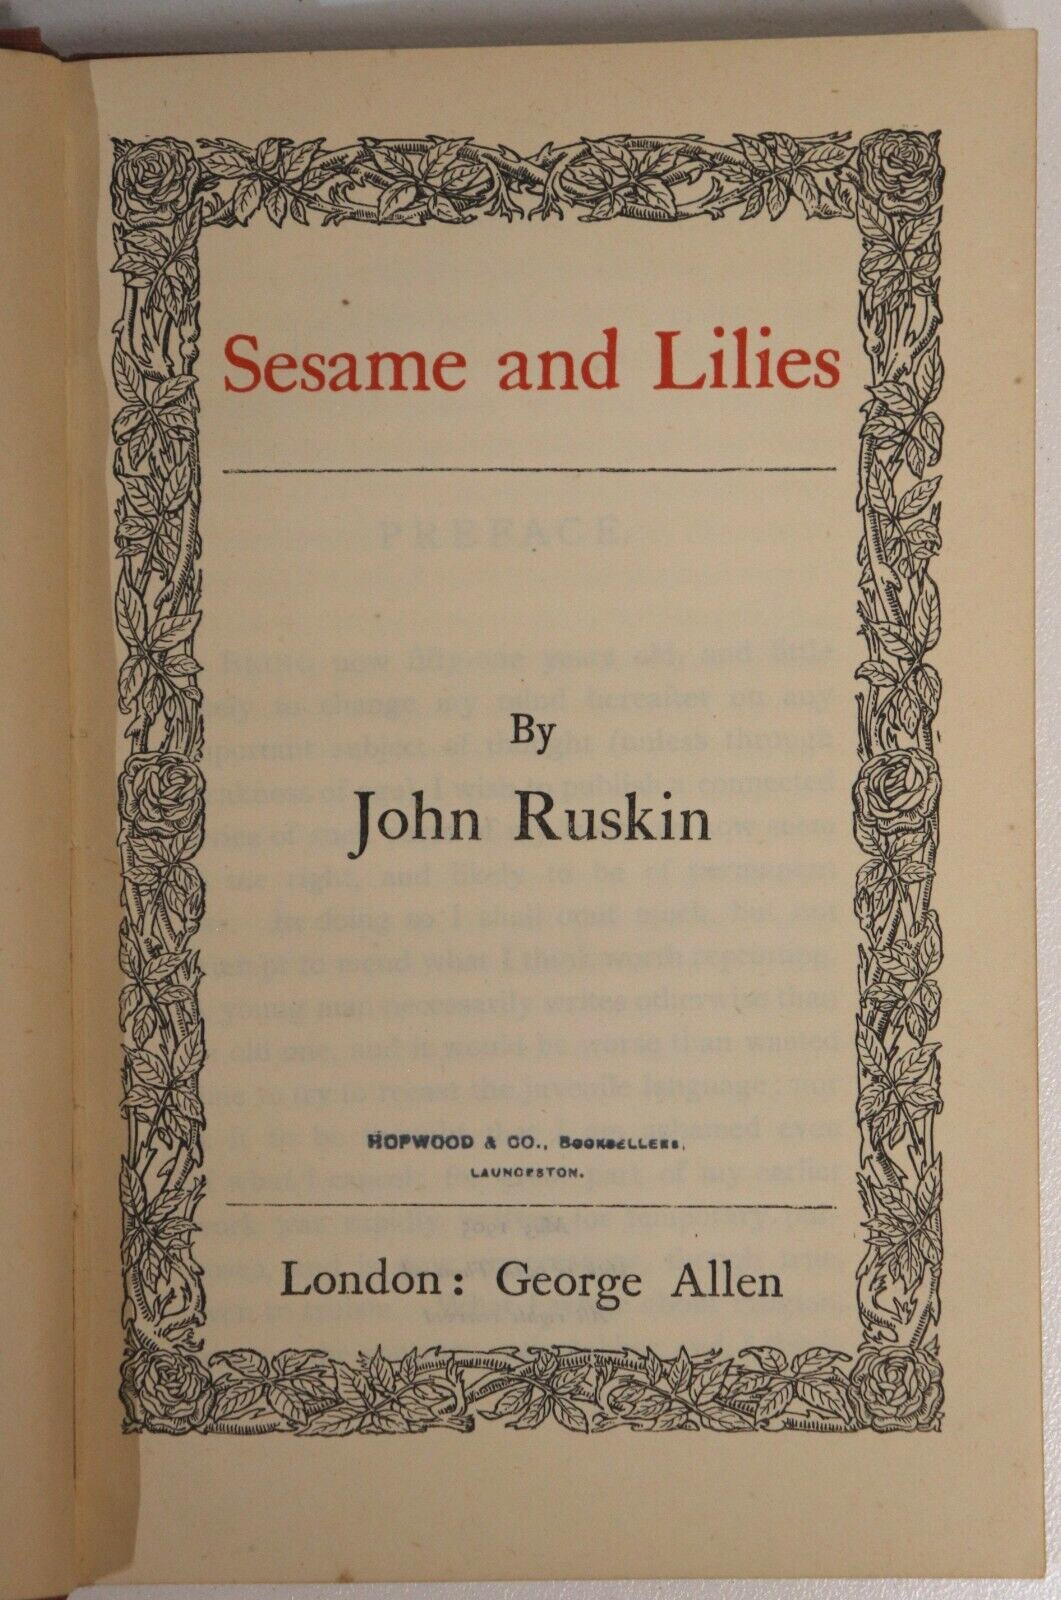 Sesame and Lilies by John Ruskin - 1905 - Antique Philosophy Book